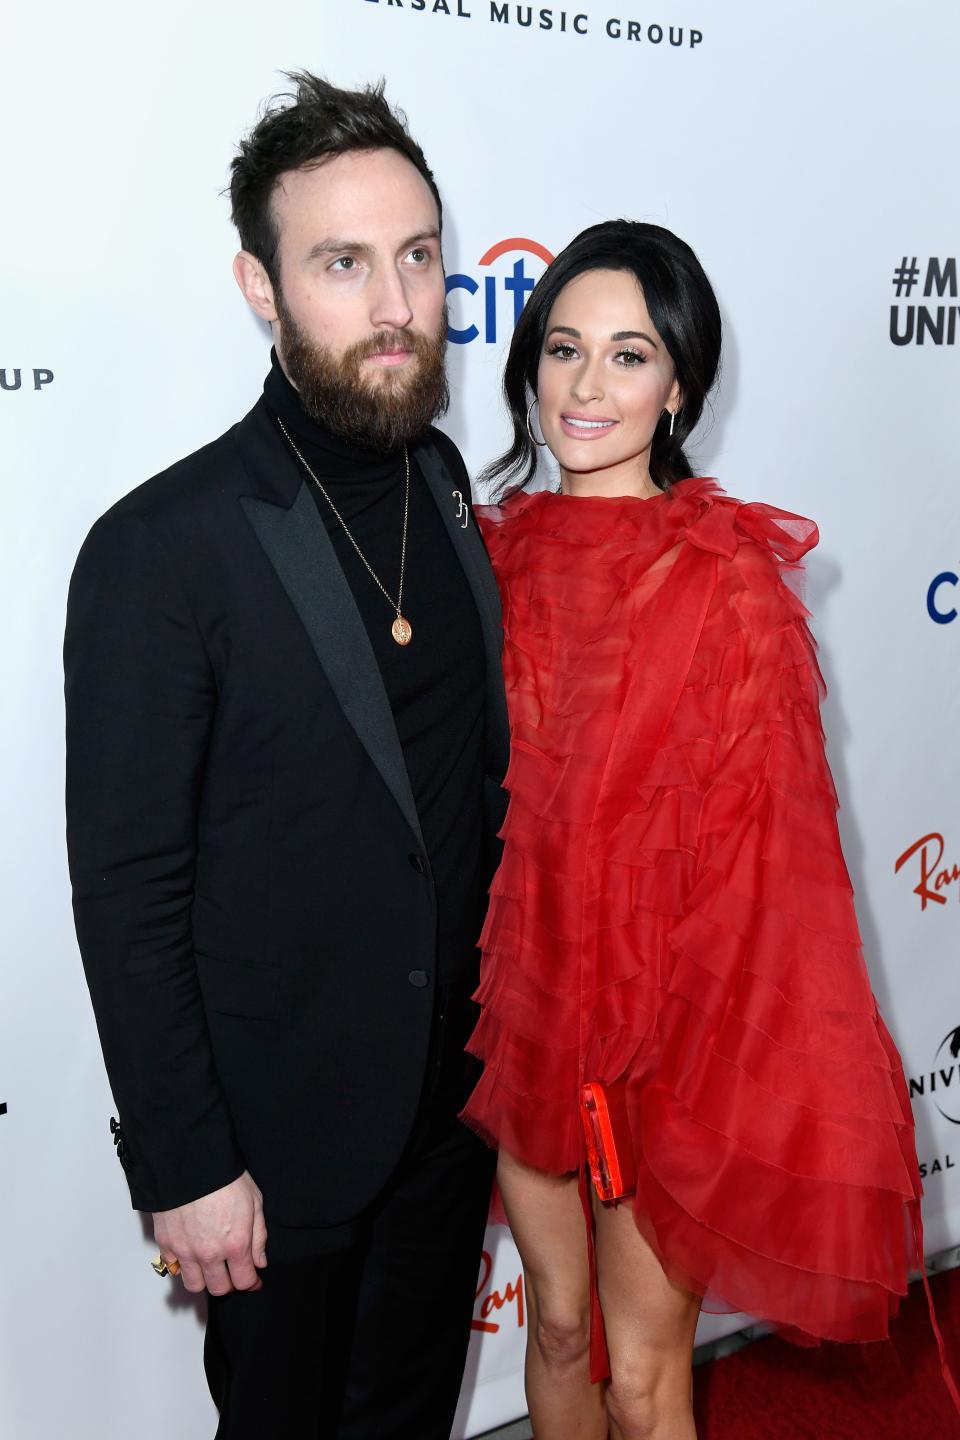 Grammy-winning singer Kacey Musgraves and her musician-husband, Ruston Kelly, have filed for divorce after almost three years of marriage.